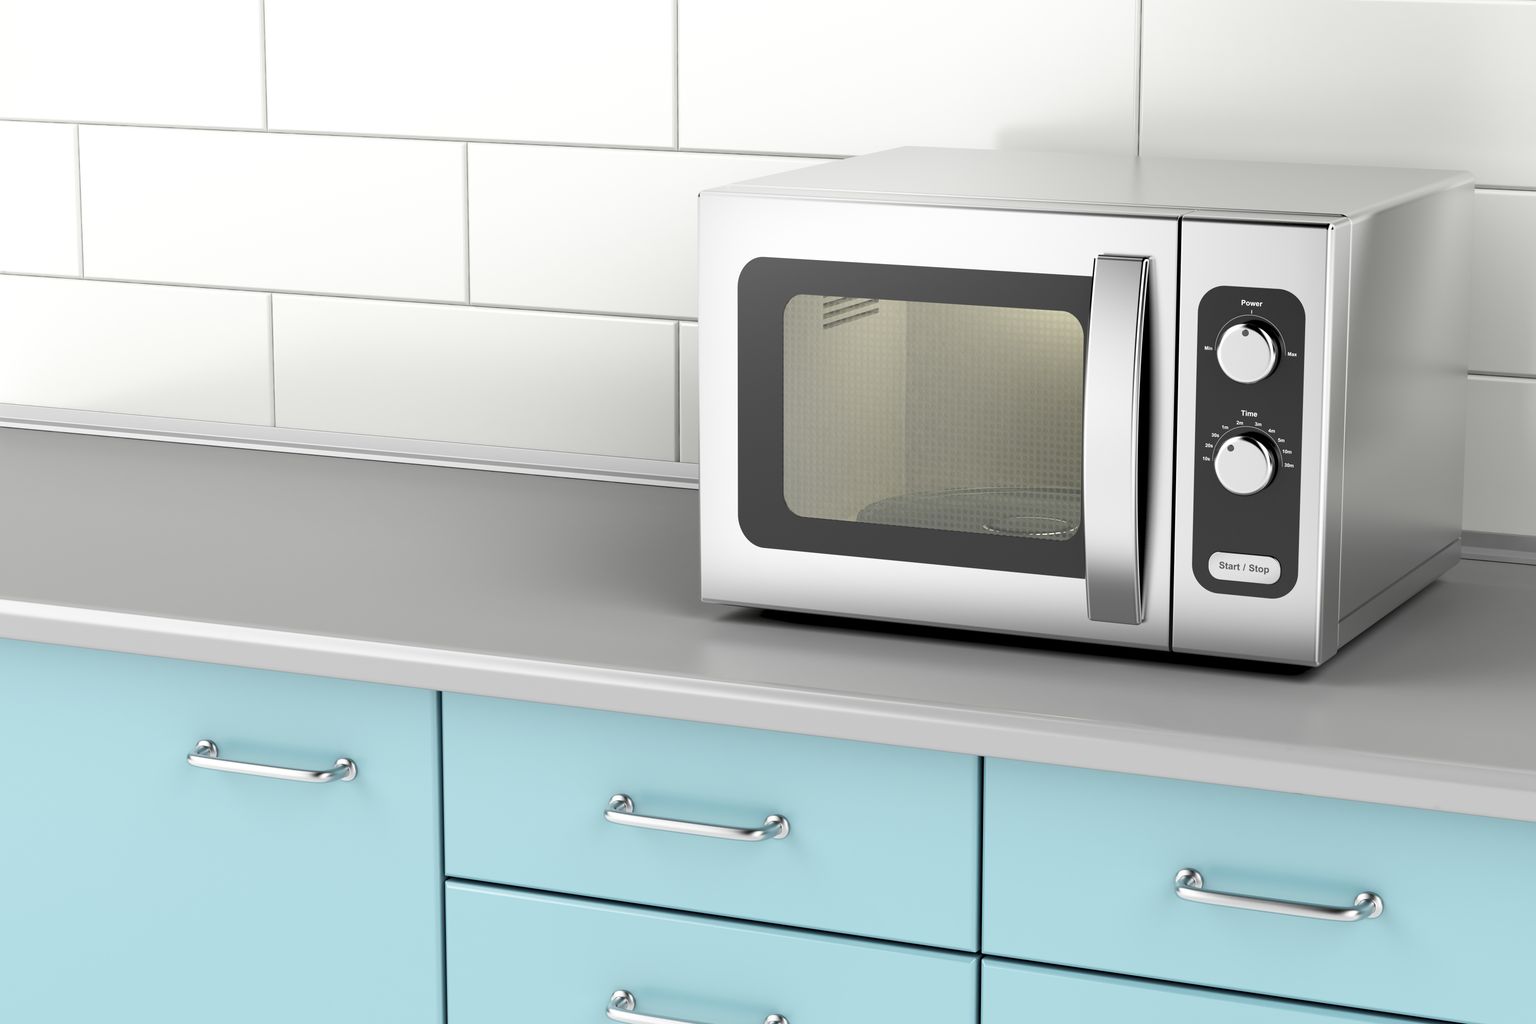 Silver microwave oven